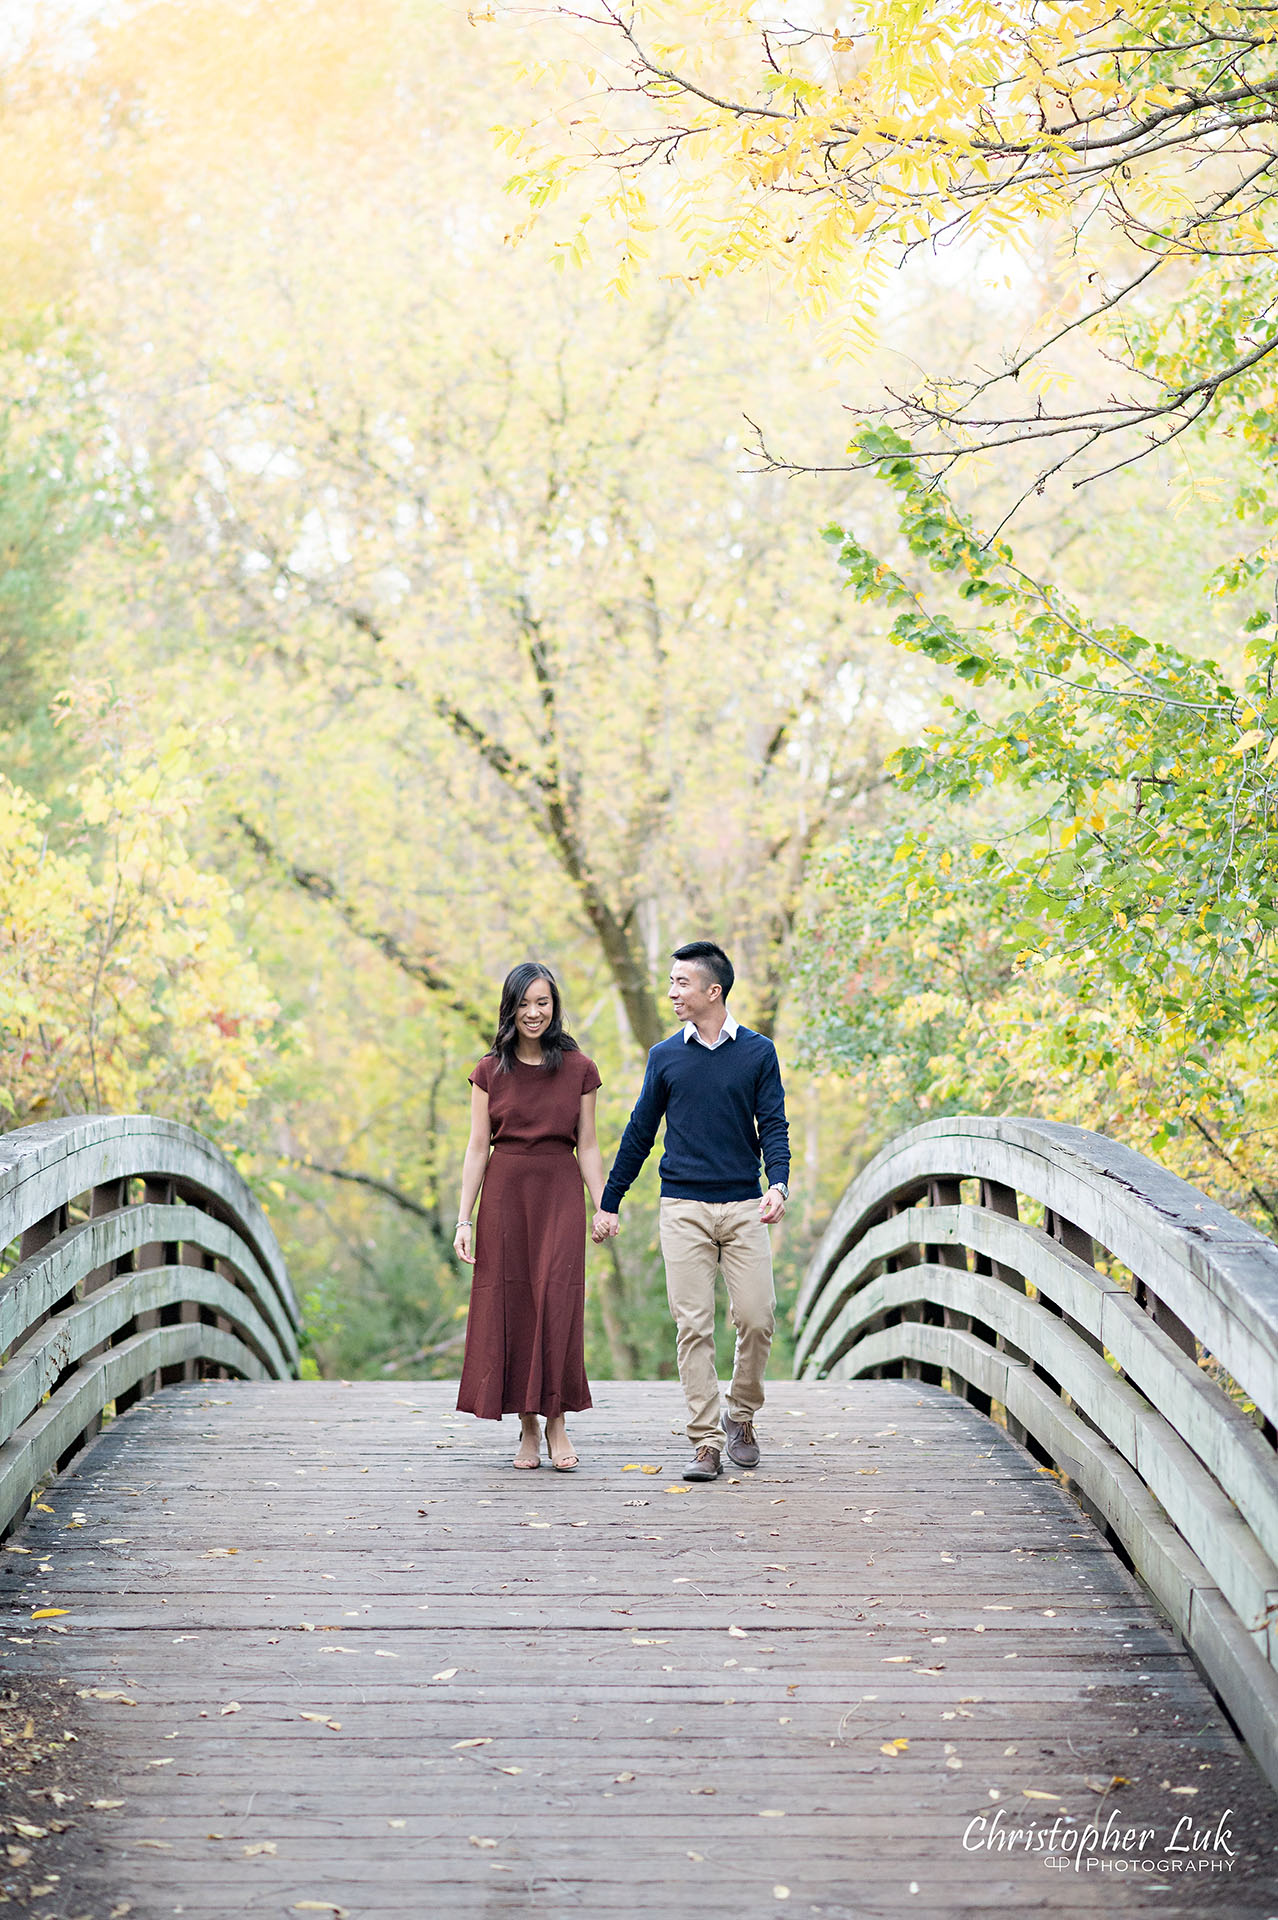 Christopher Luk Toronto Wedding Engagement Session Photographer Autumn Fall Leaves Natural Candid Photojournalistic Bride Groom Bridge Holding Hands Walking Together